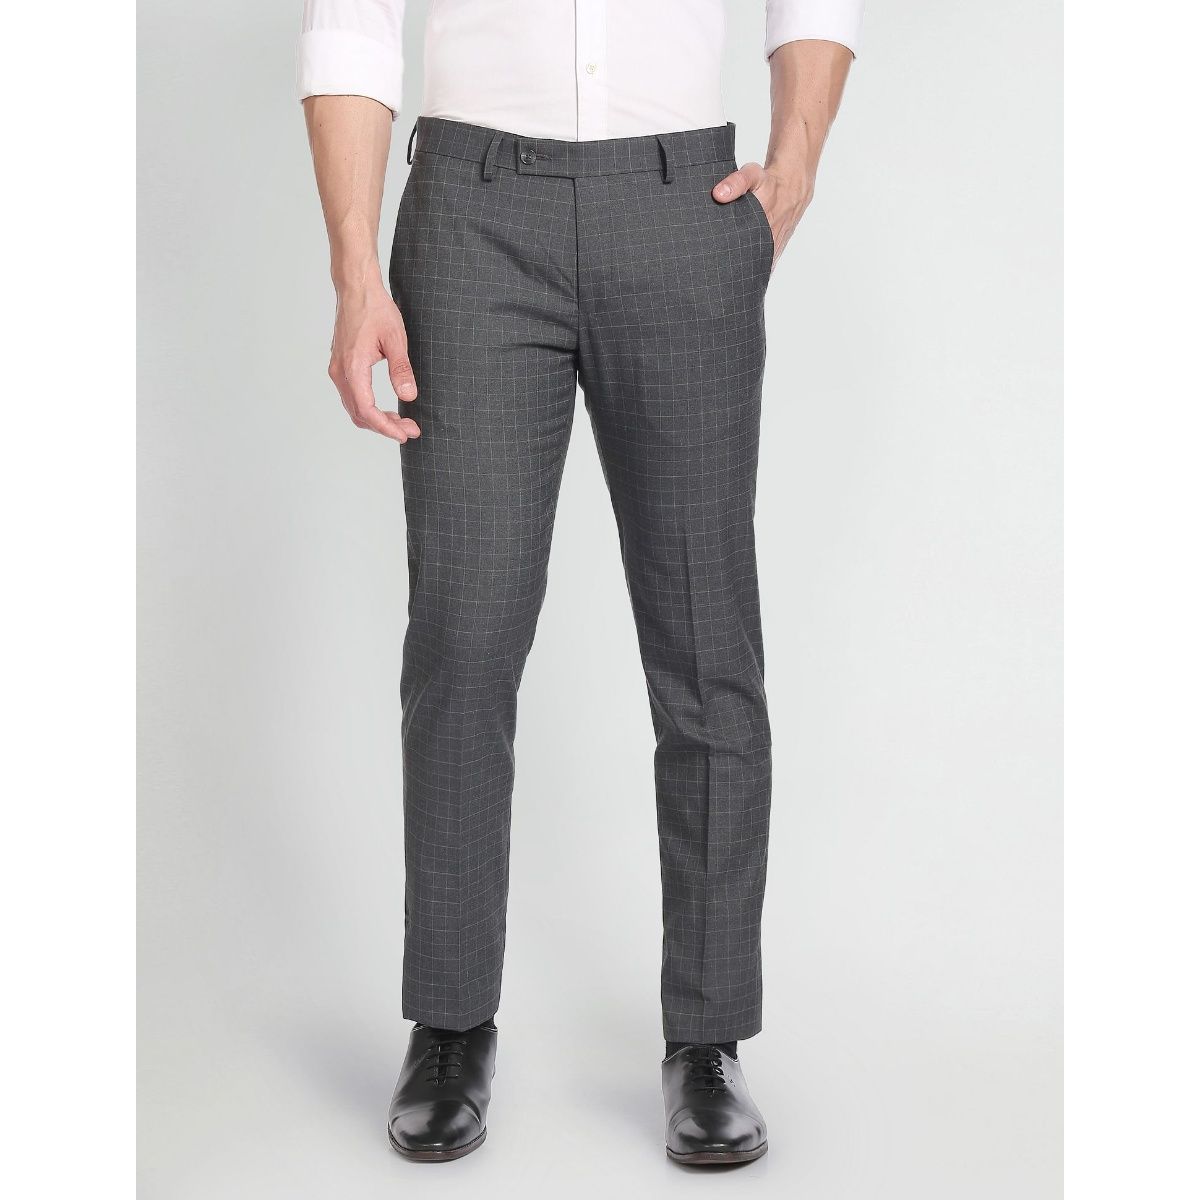 Buy Casual Trousers in India, Made to Measure Trousers in India